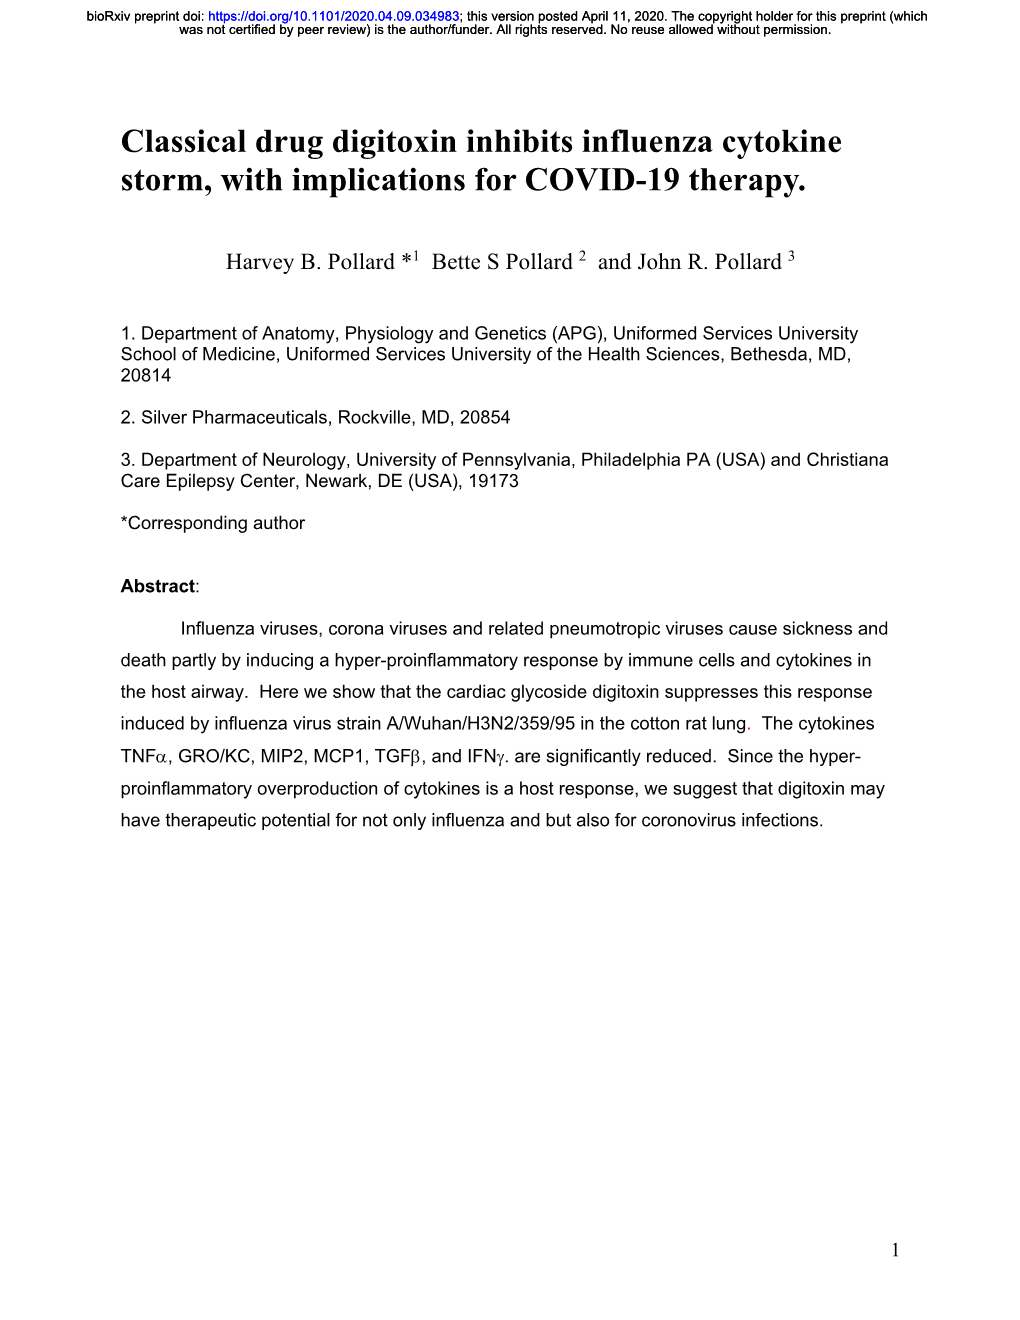 Classical Drug Digitoxin Inhibits Influenza Cytokine Storm, with Implications for COVID-19 Therapy